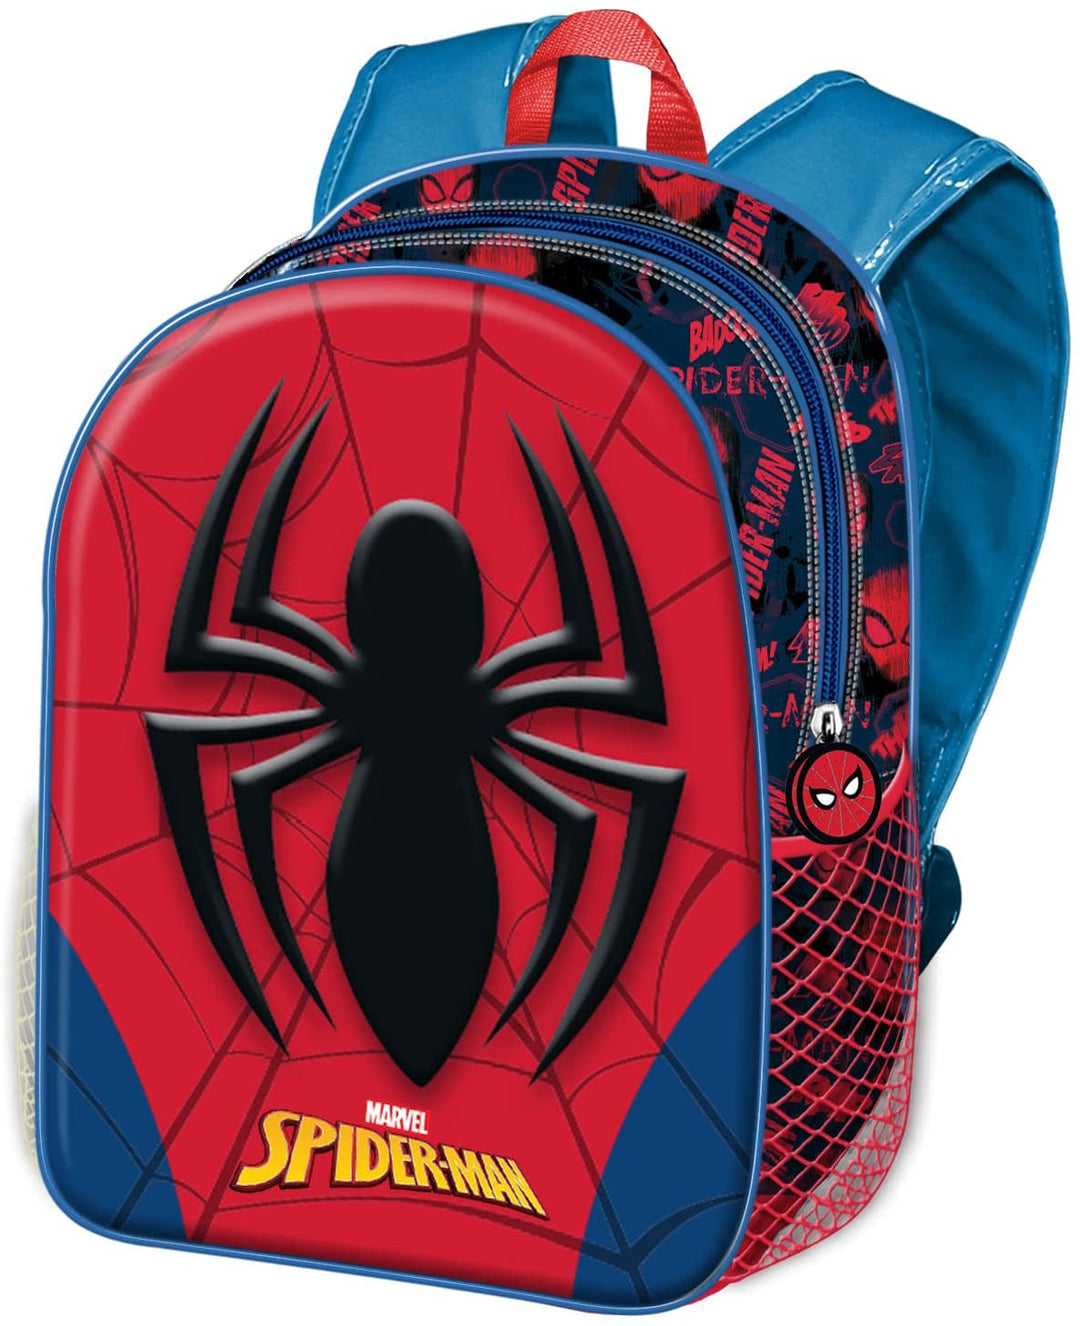 Spiderman Spider-Small 3D Backpack, Red